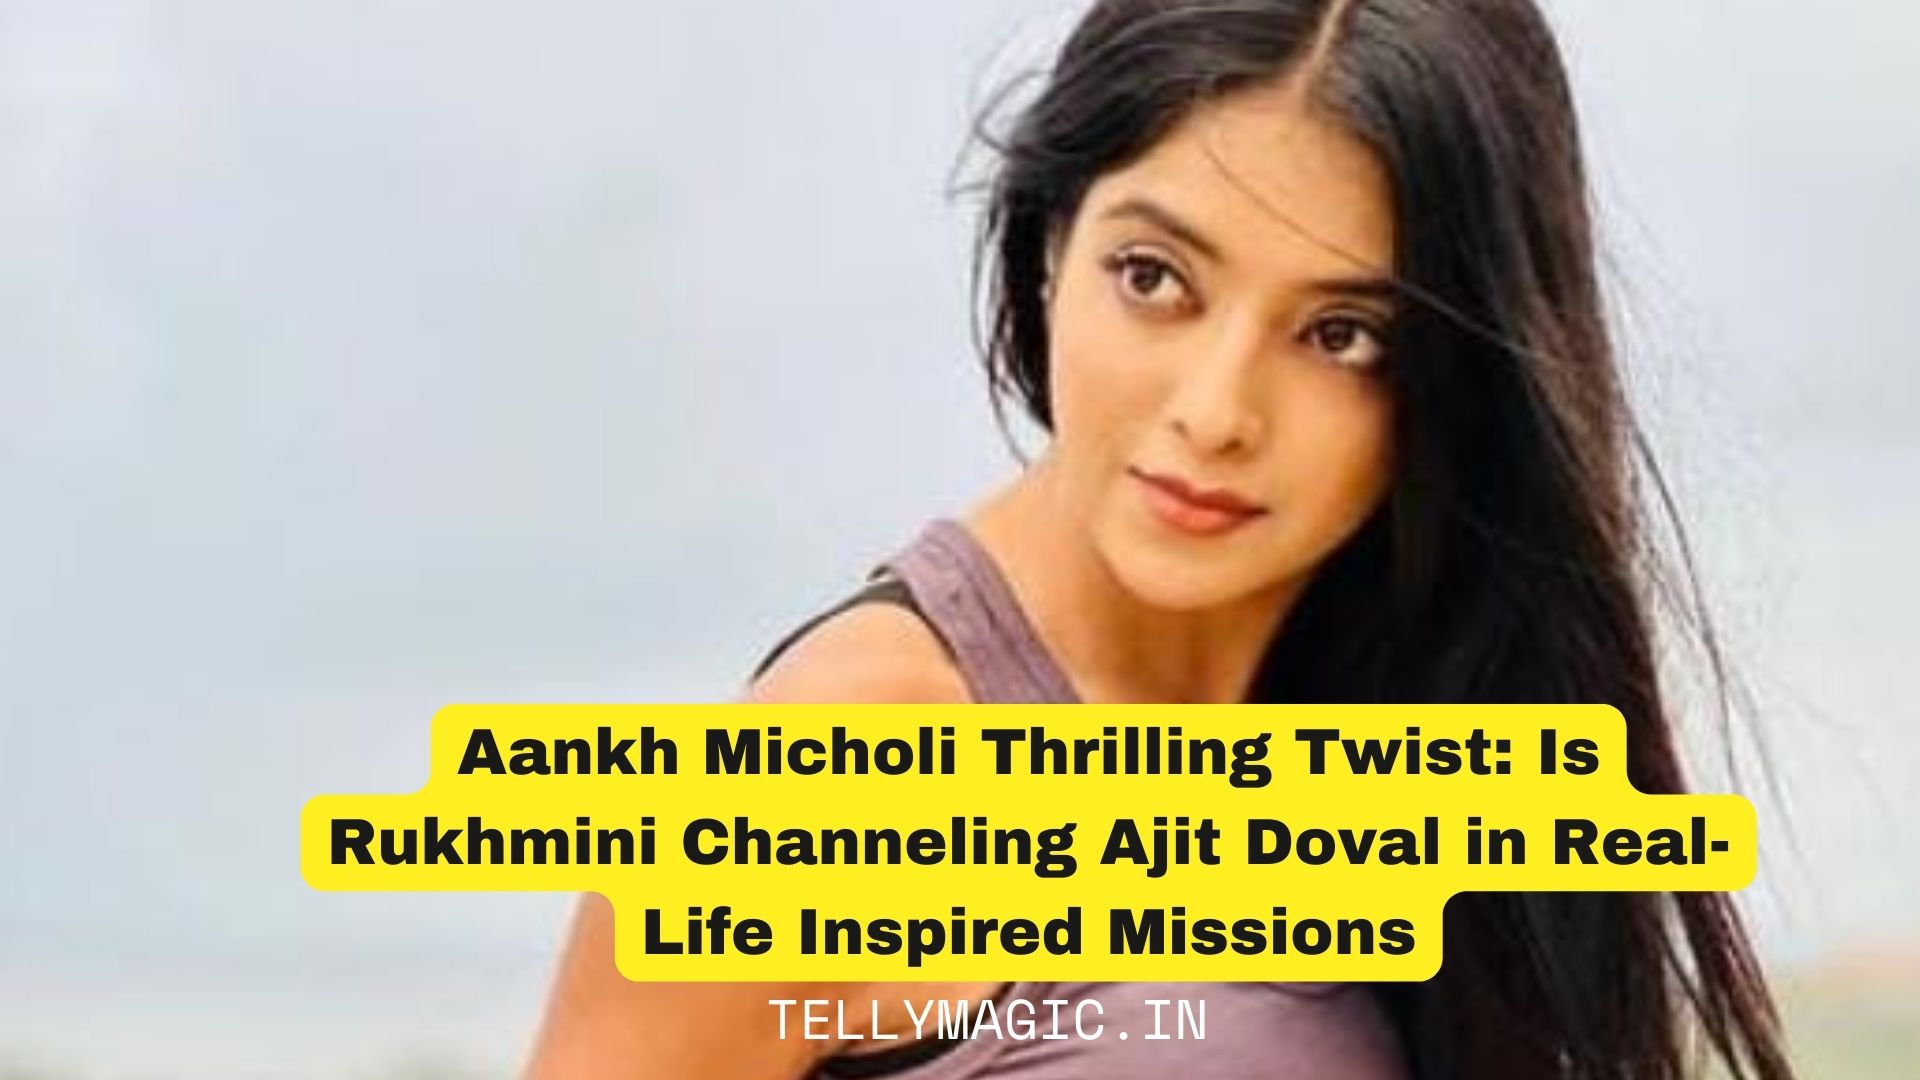 Aankh Micholi’s Thrilling Twist: Is Rukhmini Channeling Ajit Doval in Real-Life Inspired Missions